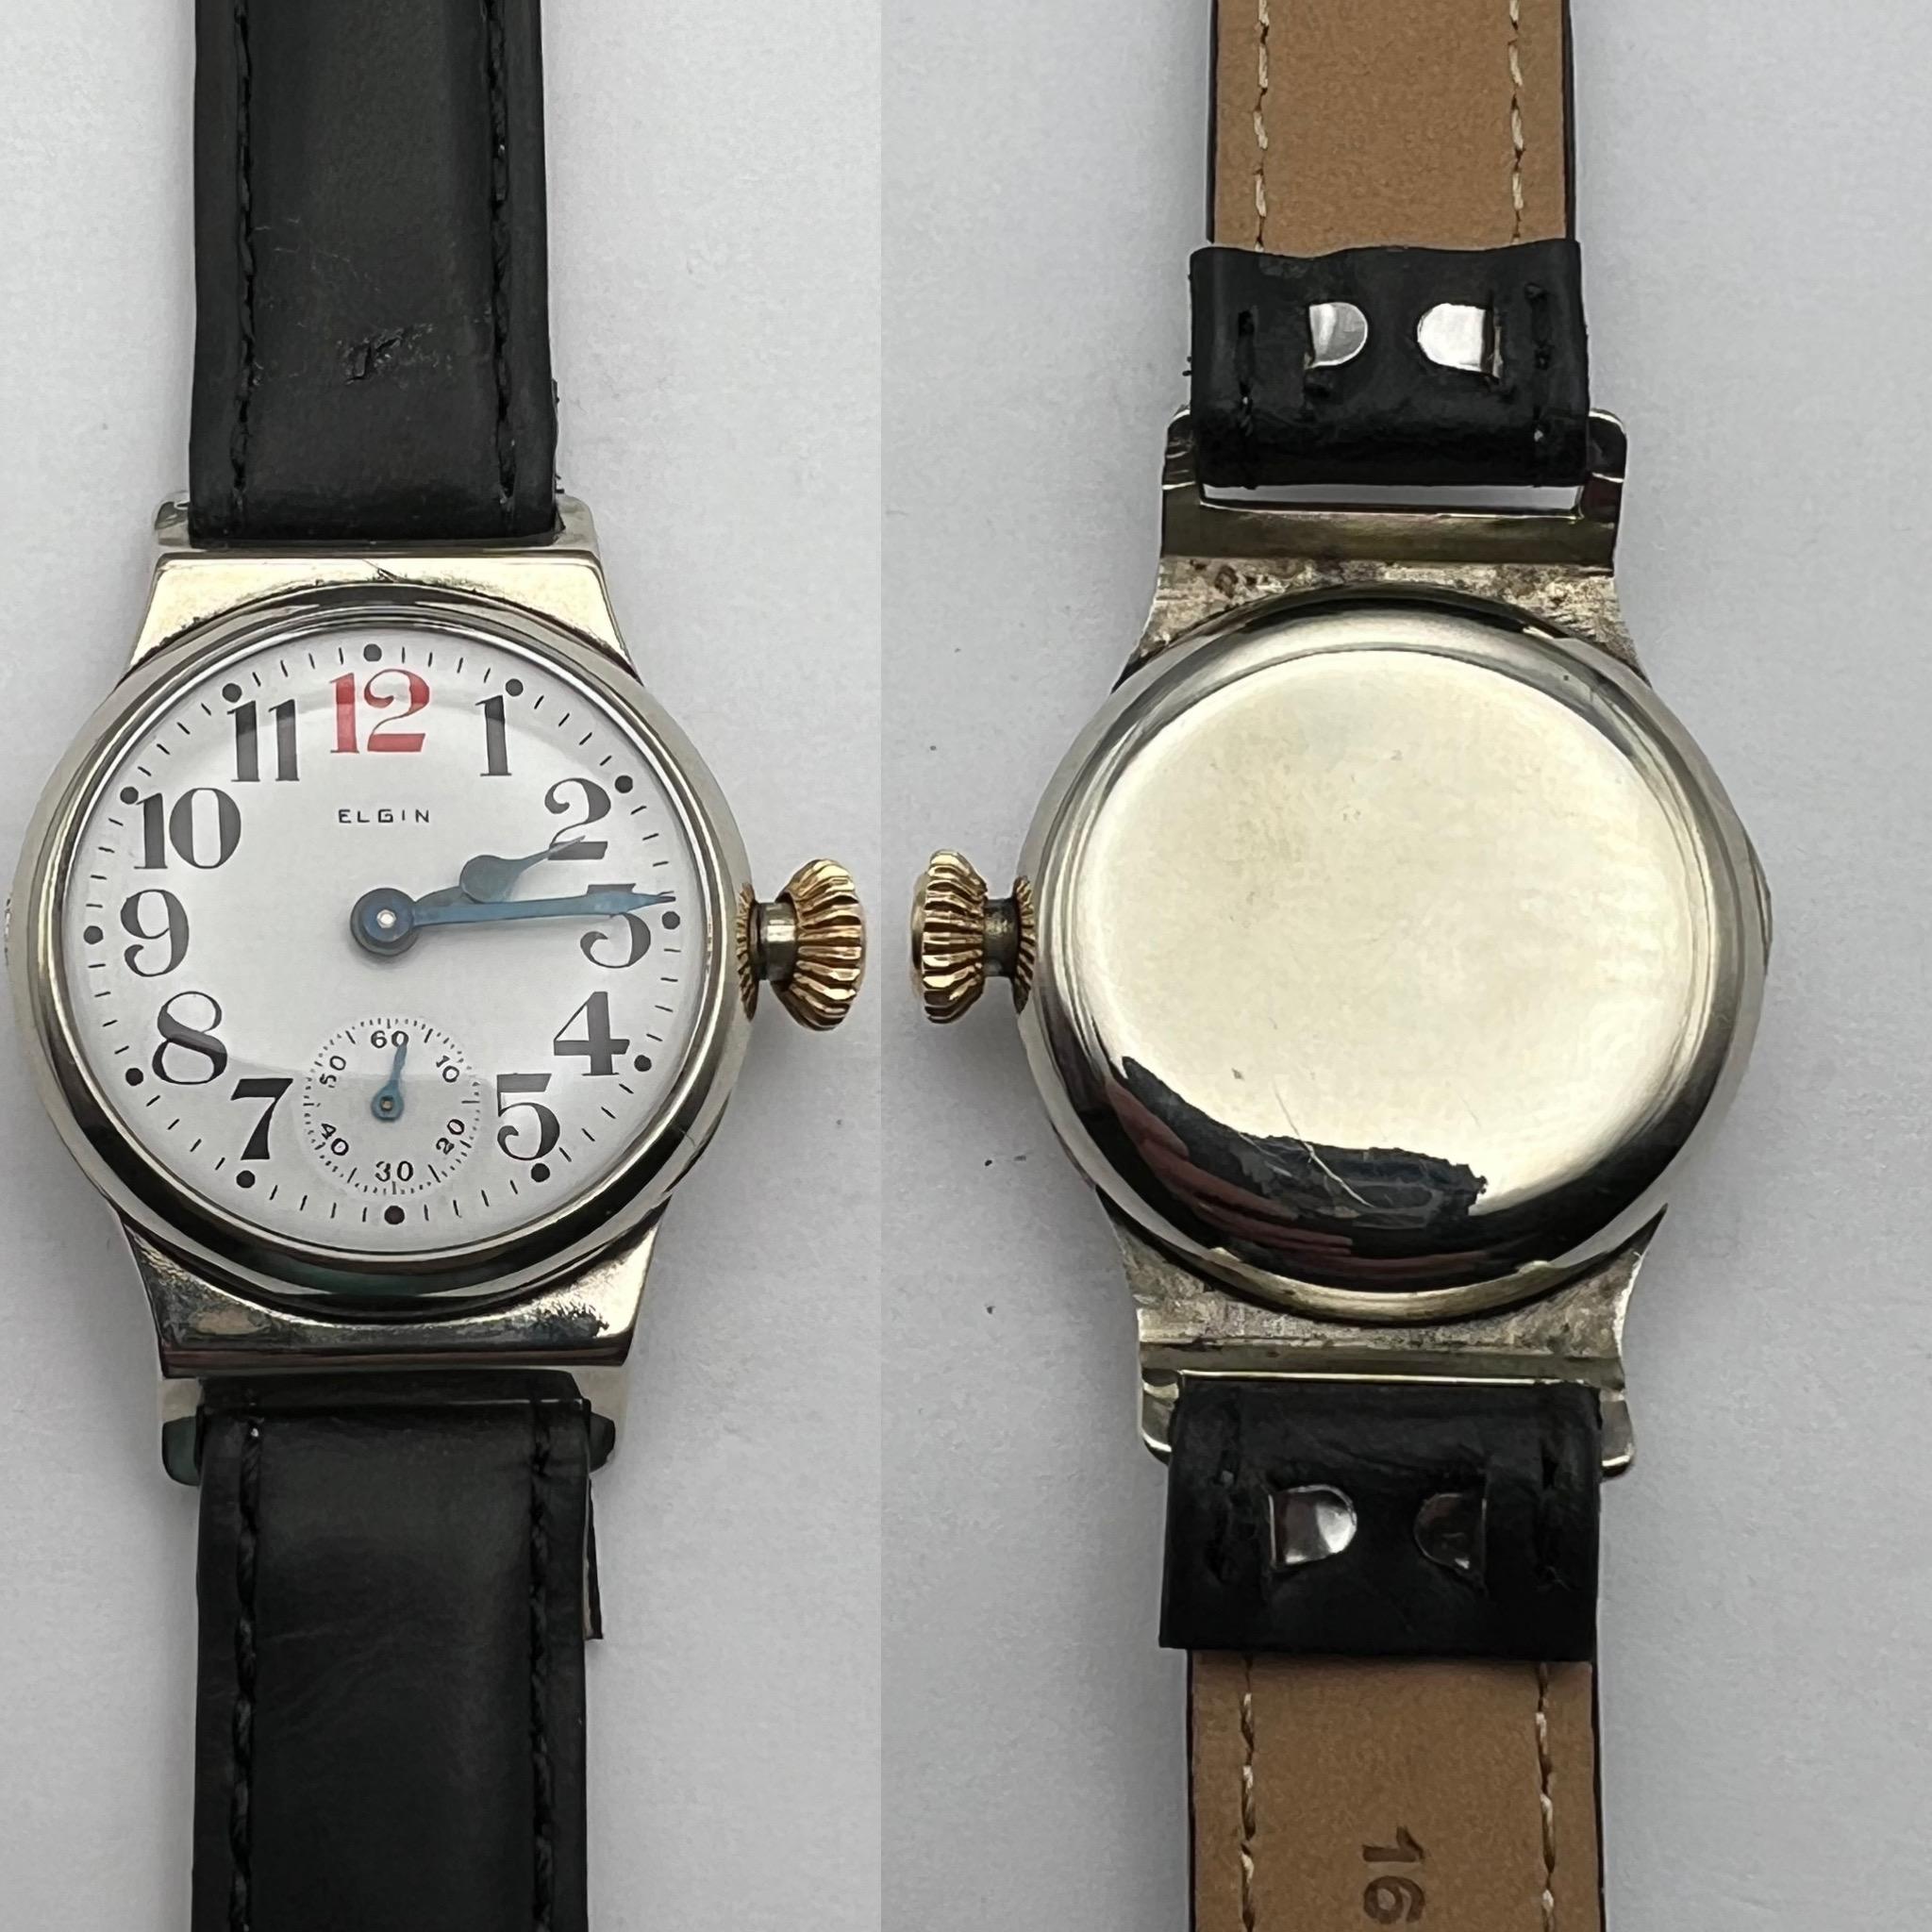 1919 Elgin Hermetic Trench Watch. Bold Red 12, with a “Solid Nickel Case